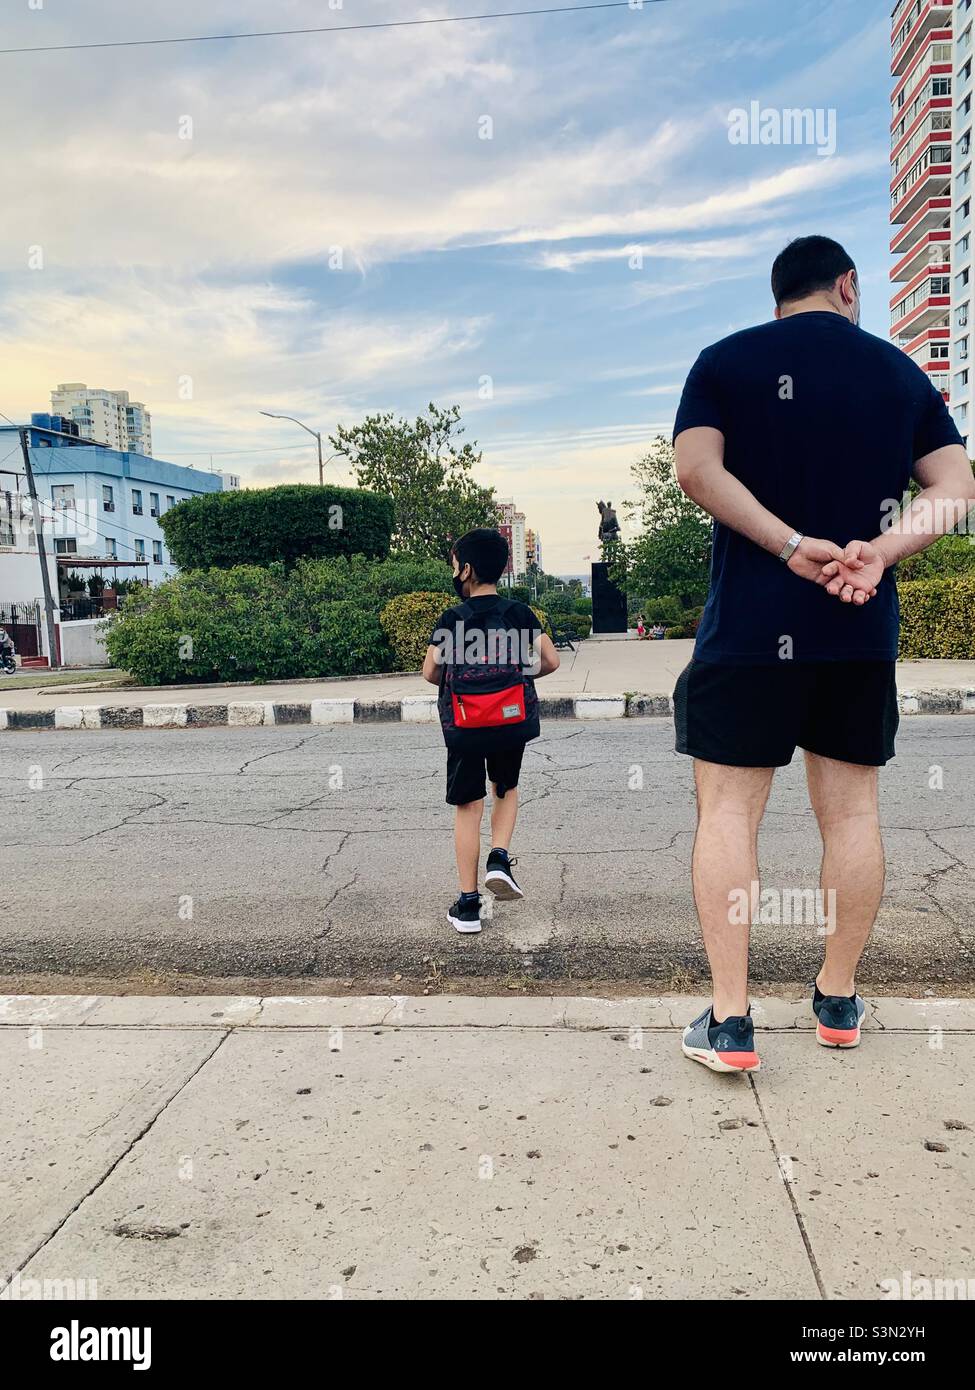 Father supervising son crossing the road. Learning to cross the street safely. Fathering concept. Adult supervision concept Stock Photo